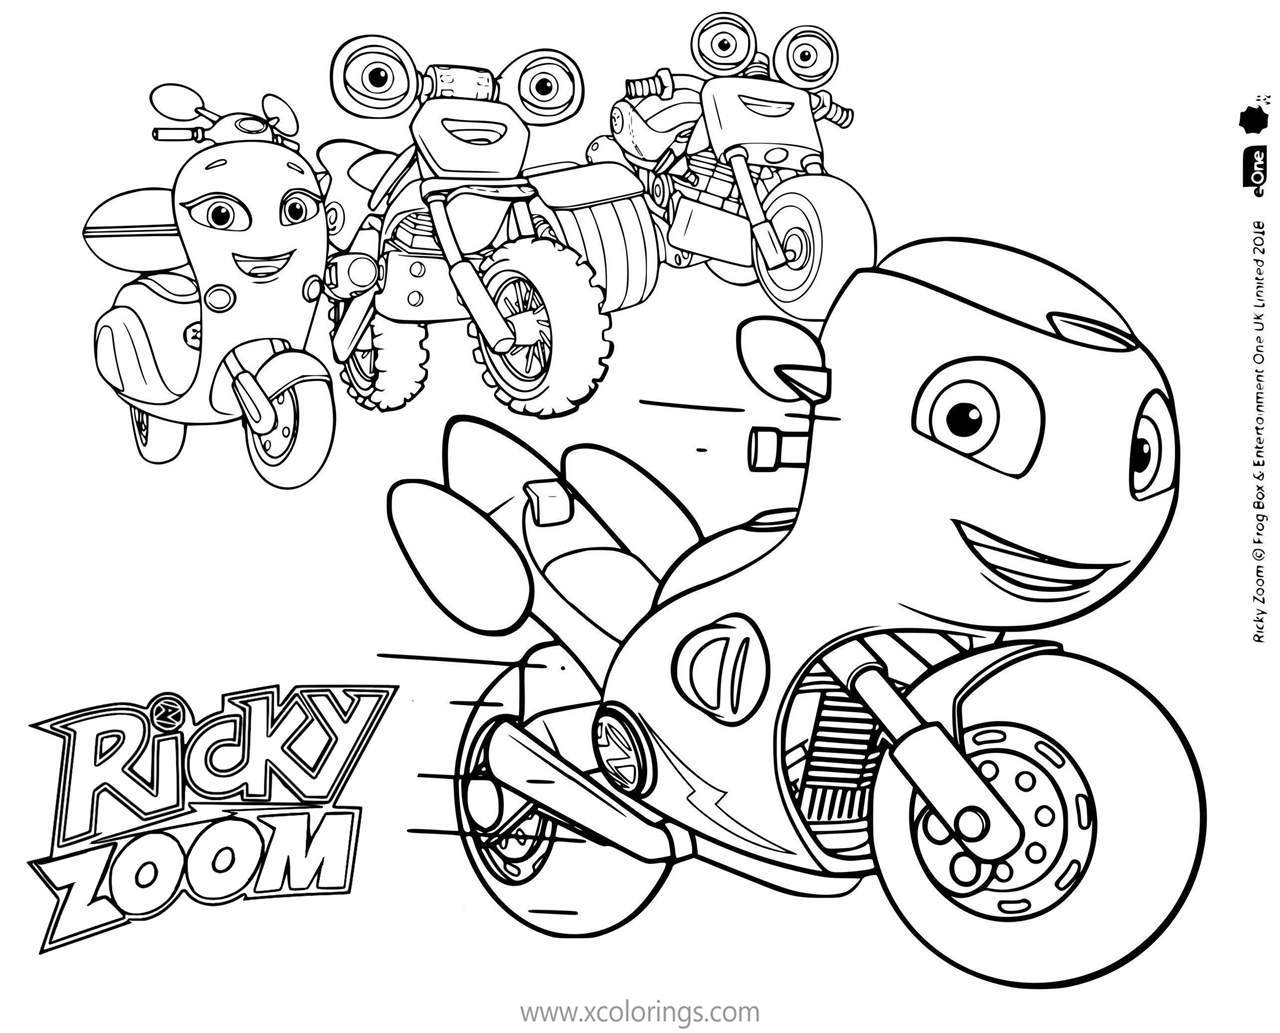 Ricky Zoom Coloring Pages Motorcycle And Friends - Xcolorings avec Coloriage Ricky Zoom